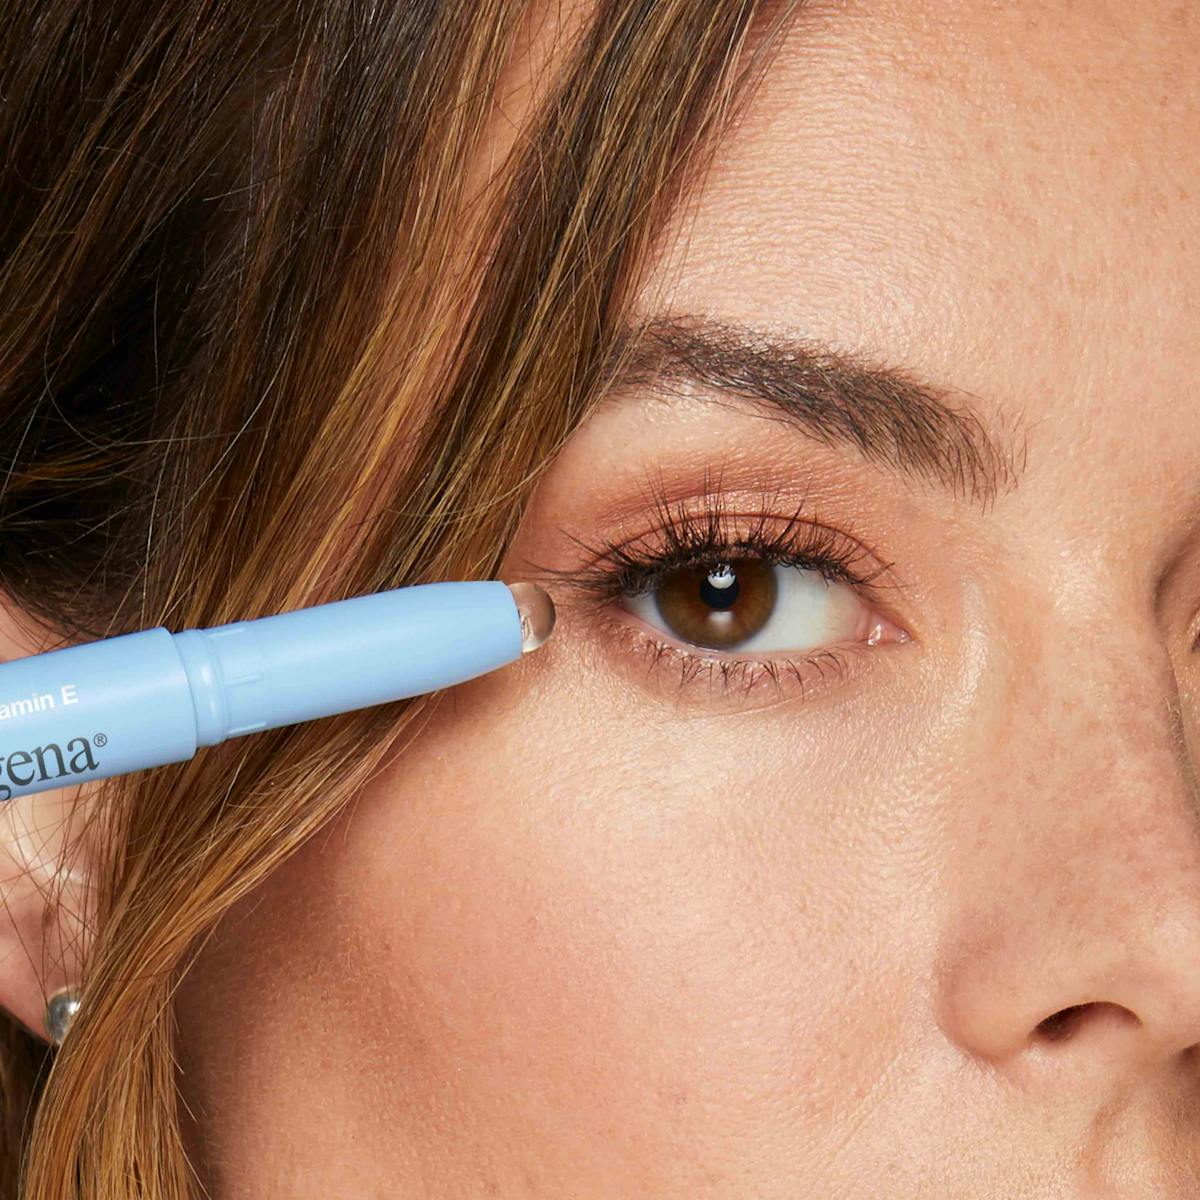 These makeup remover-filled Q-tips will fix your smudged eyeliner